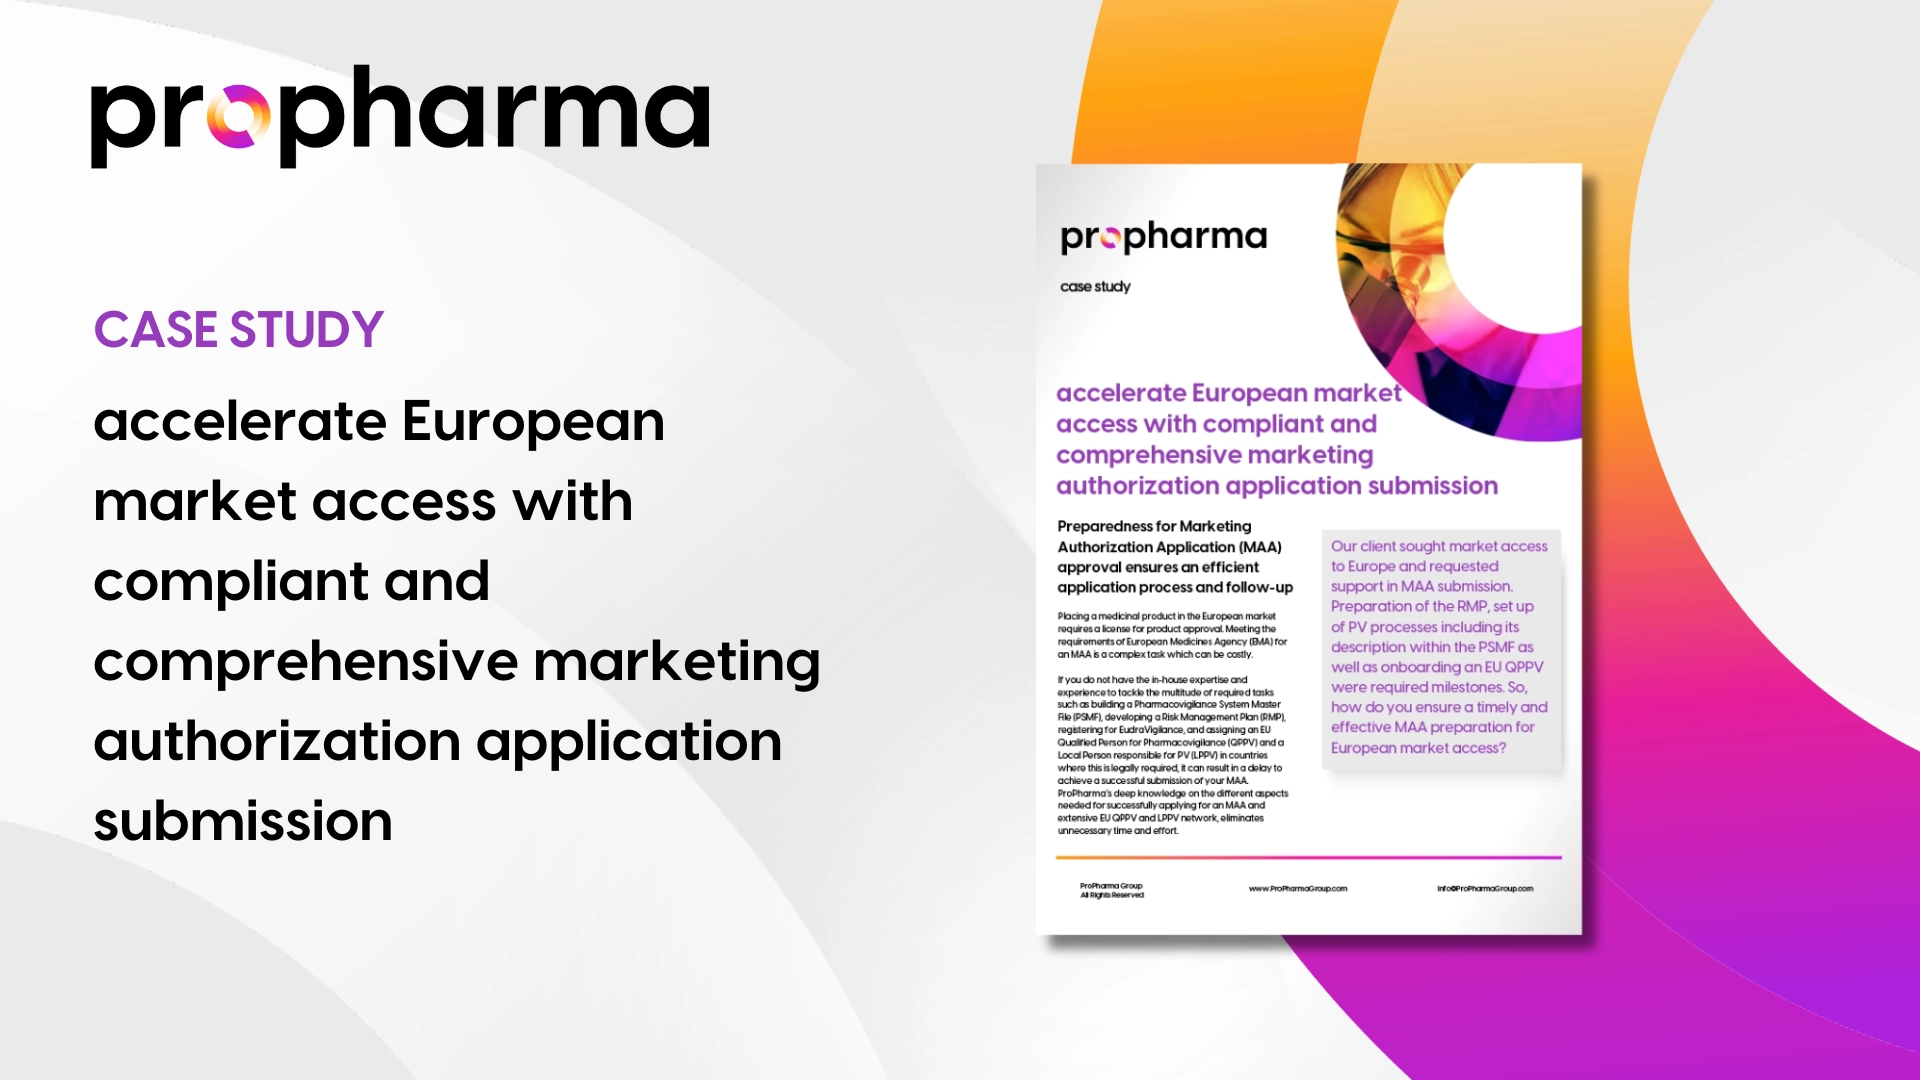 Accelerate European Market Access with Compliant and Comprehensive MAA Submission - ProPharma